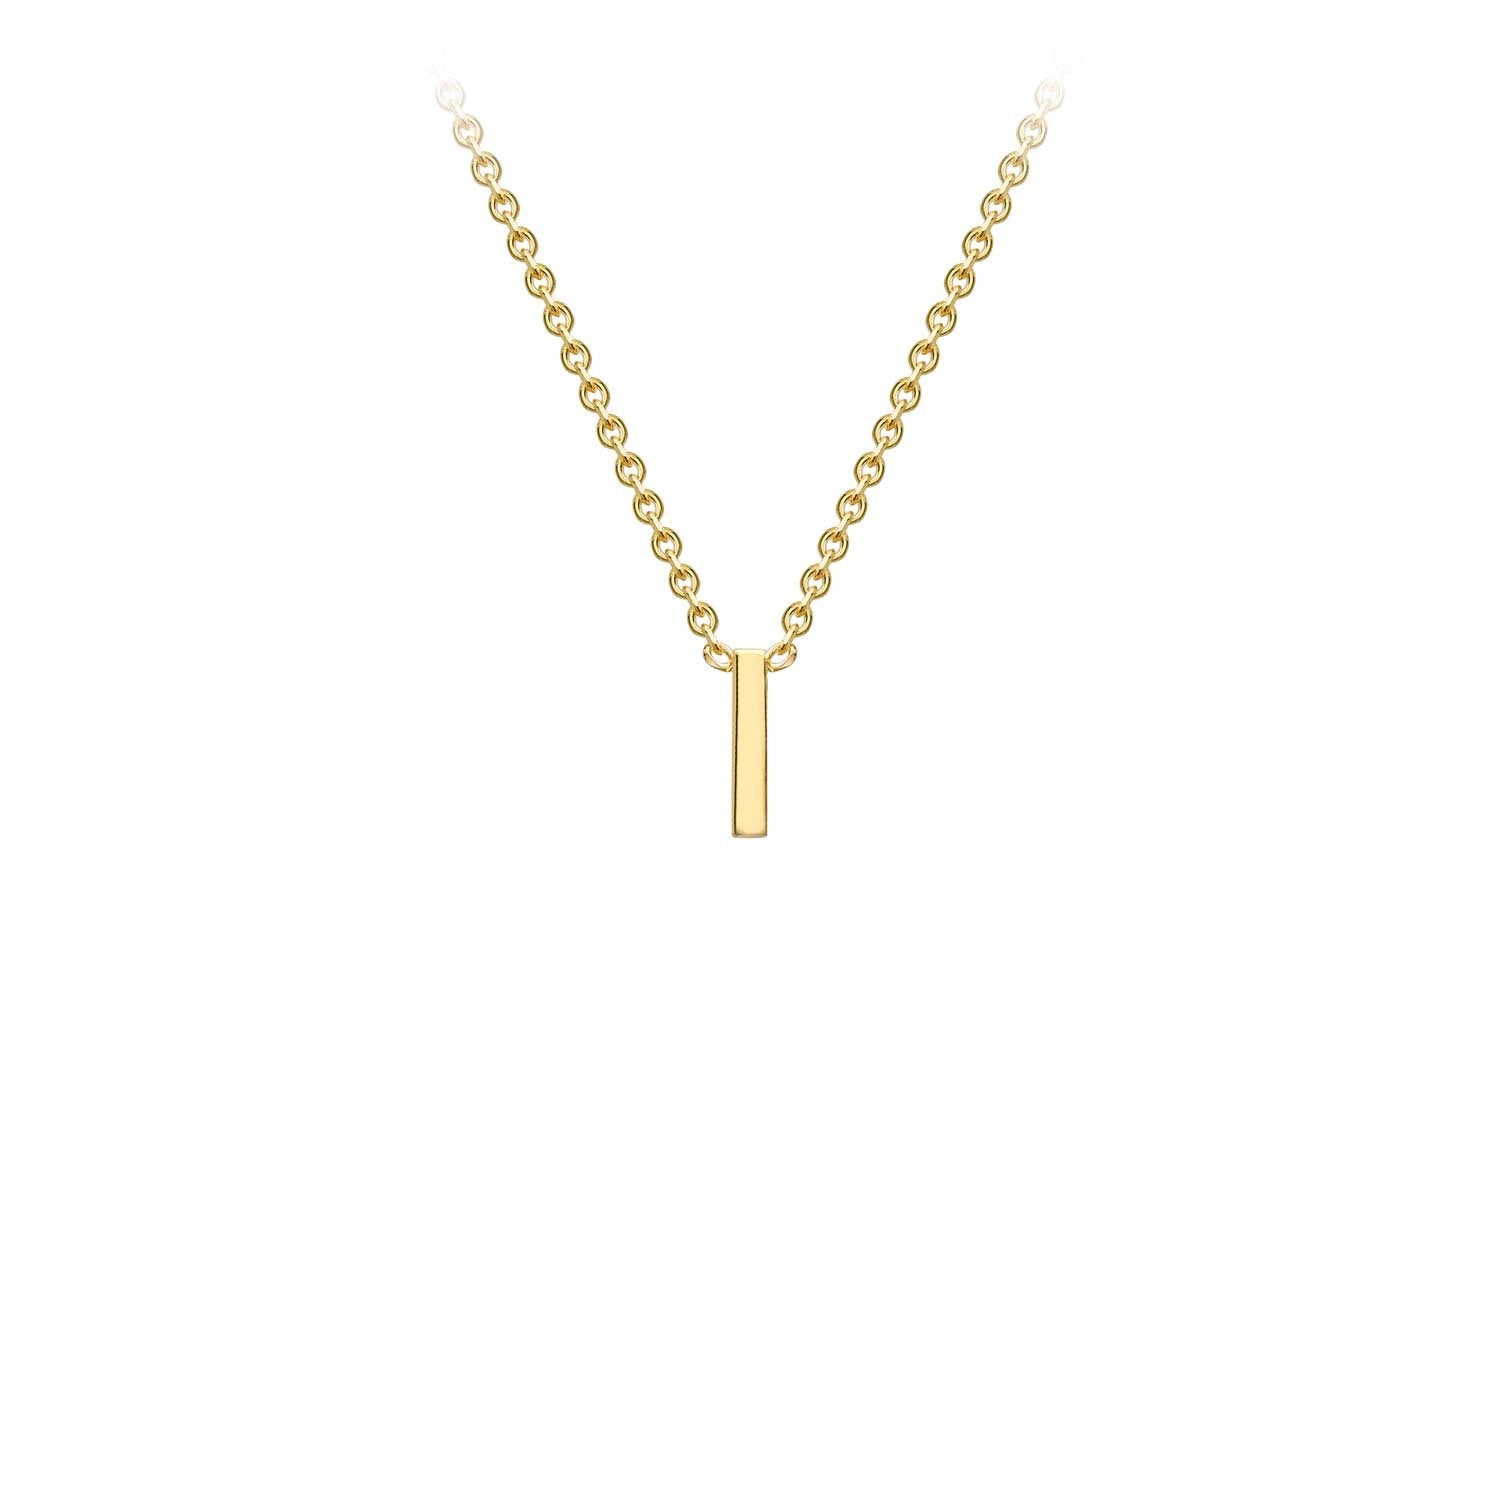 9ct Yellow Gold 'I' Petite Initial Adjustable Letter Necklace 38/43cm